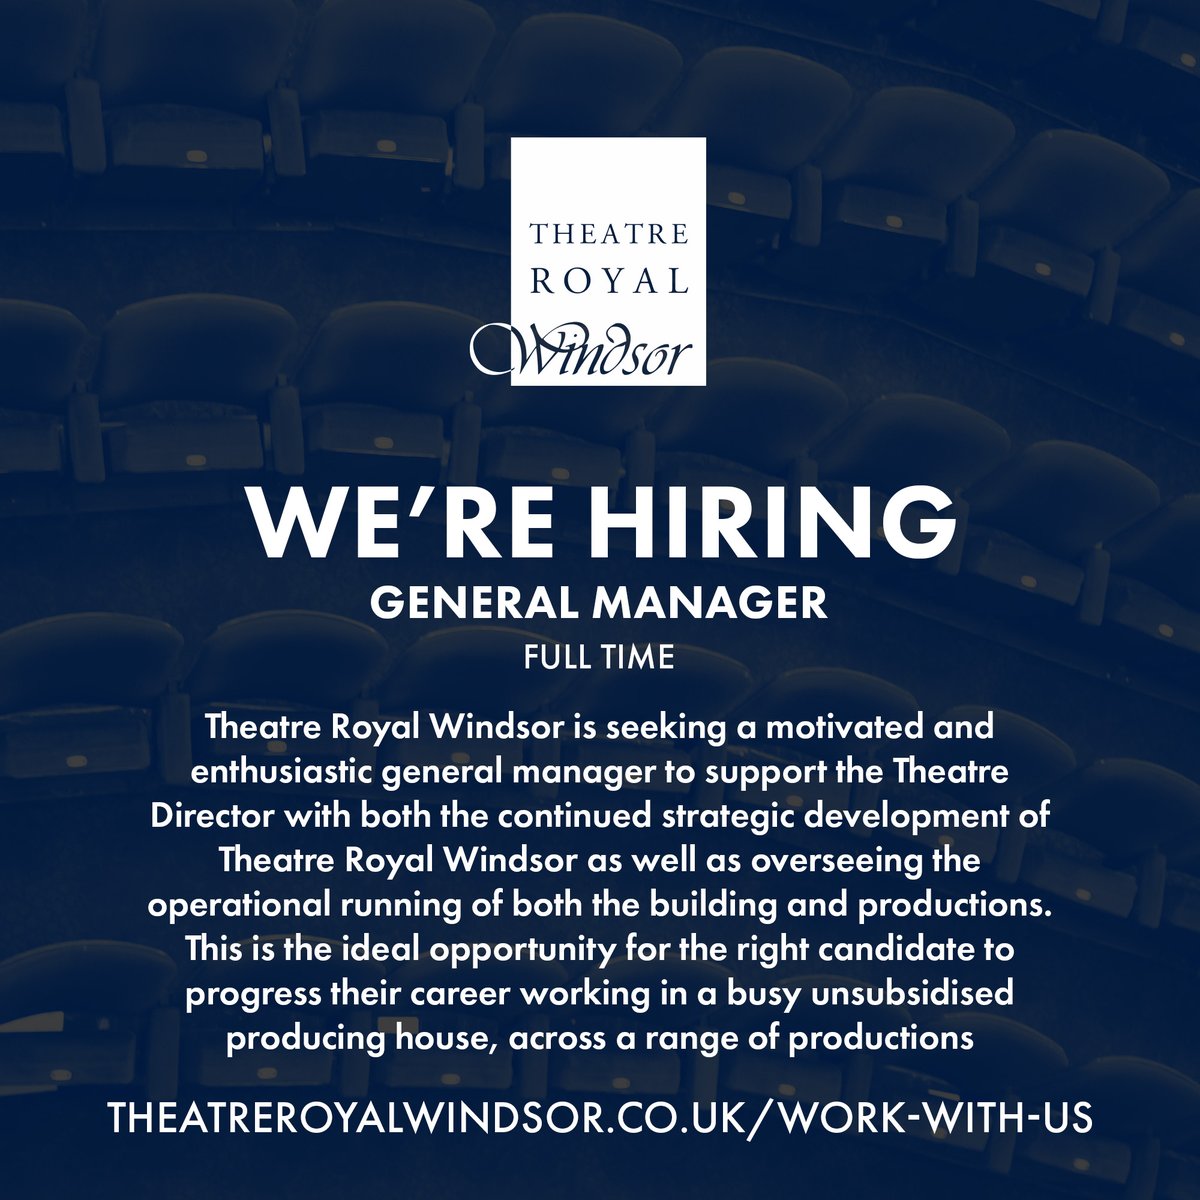 ⭐ WE'RE HIRING ⭐ We're looking for a new General Manager to support our Theatre Director with the continued strategic development of Theatre Royal Windsor, and oversee the running of the building and our productions. 🔗 Find out more: theatreroyalwindsor.co.uk/work-with-us/ #artsjobs